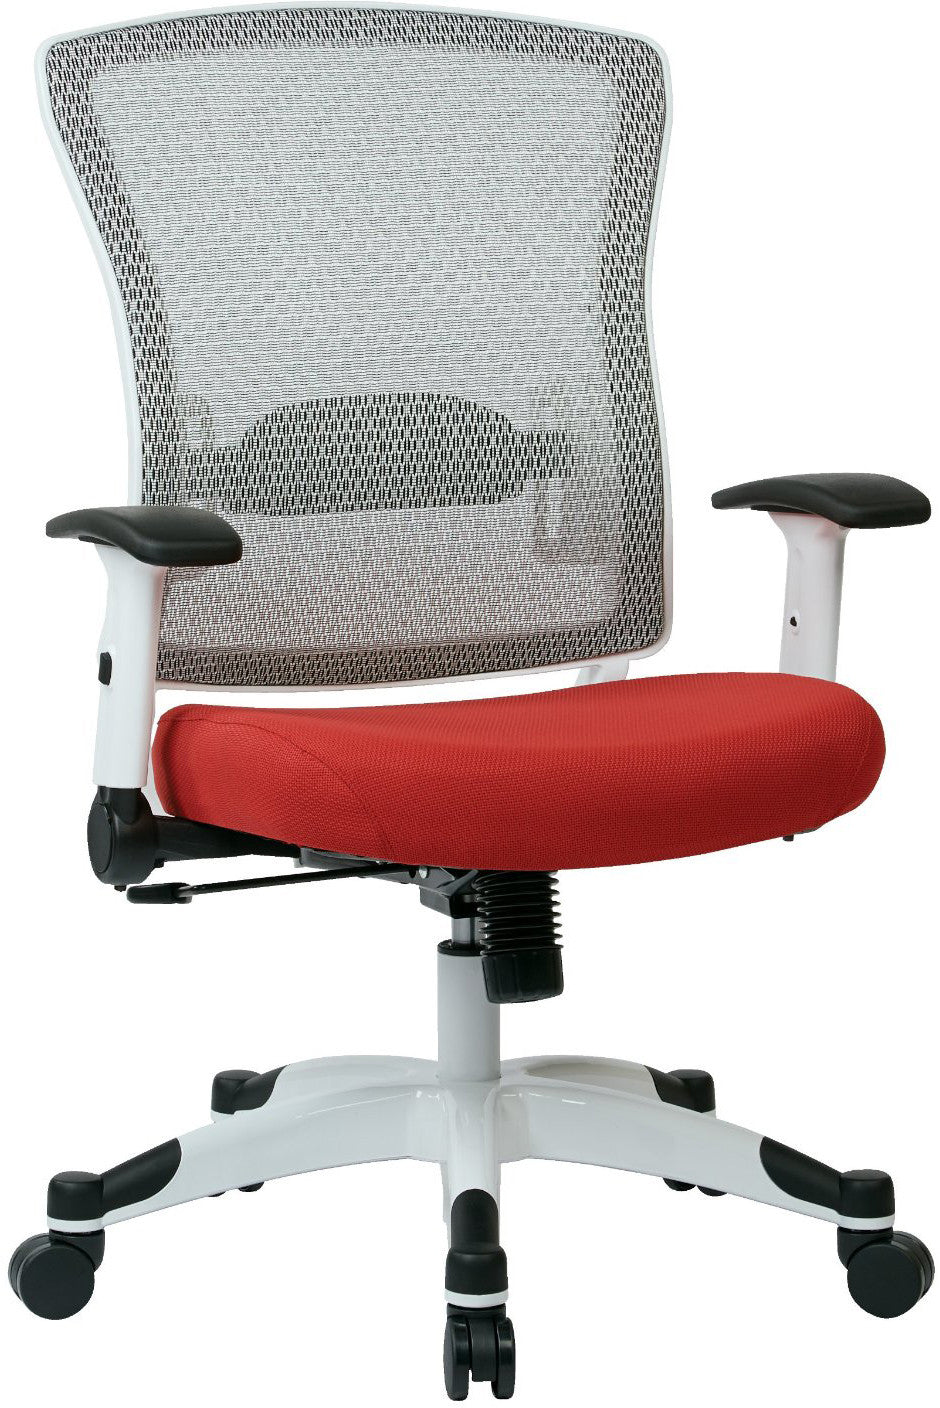 Space Seating 317w-w1c1f2w-5812 Space Seating White Frame Managers Chair With Breathable Mesh Back, Padded Mesh Seat, Adjustable Flip Arms, Adjustable